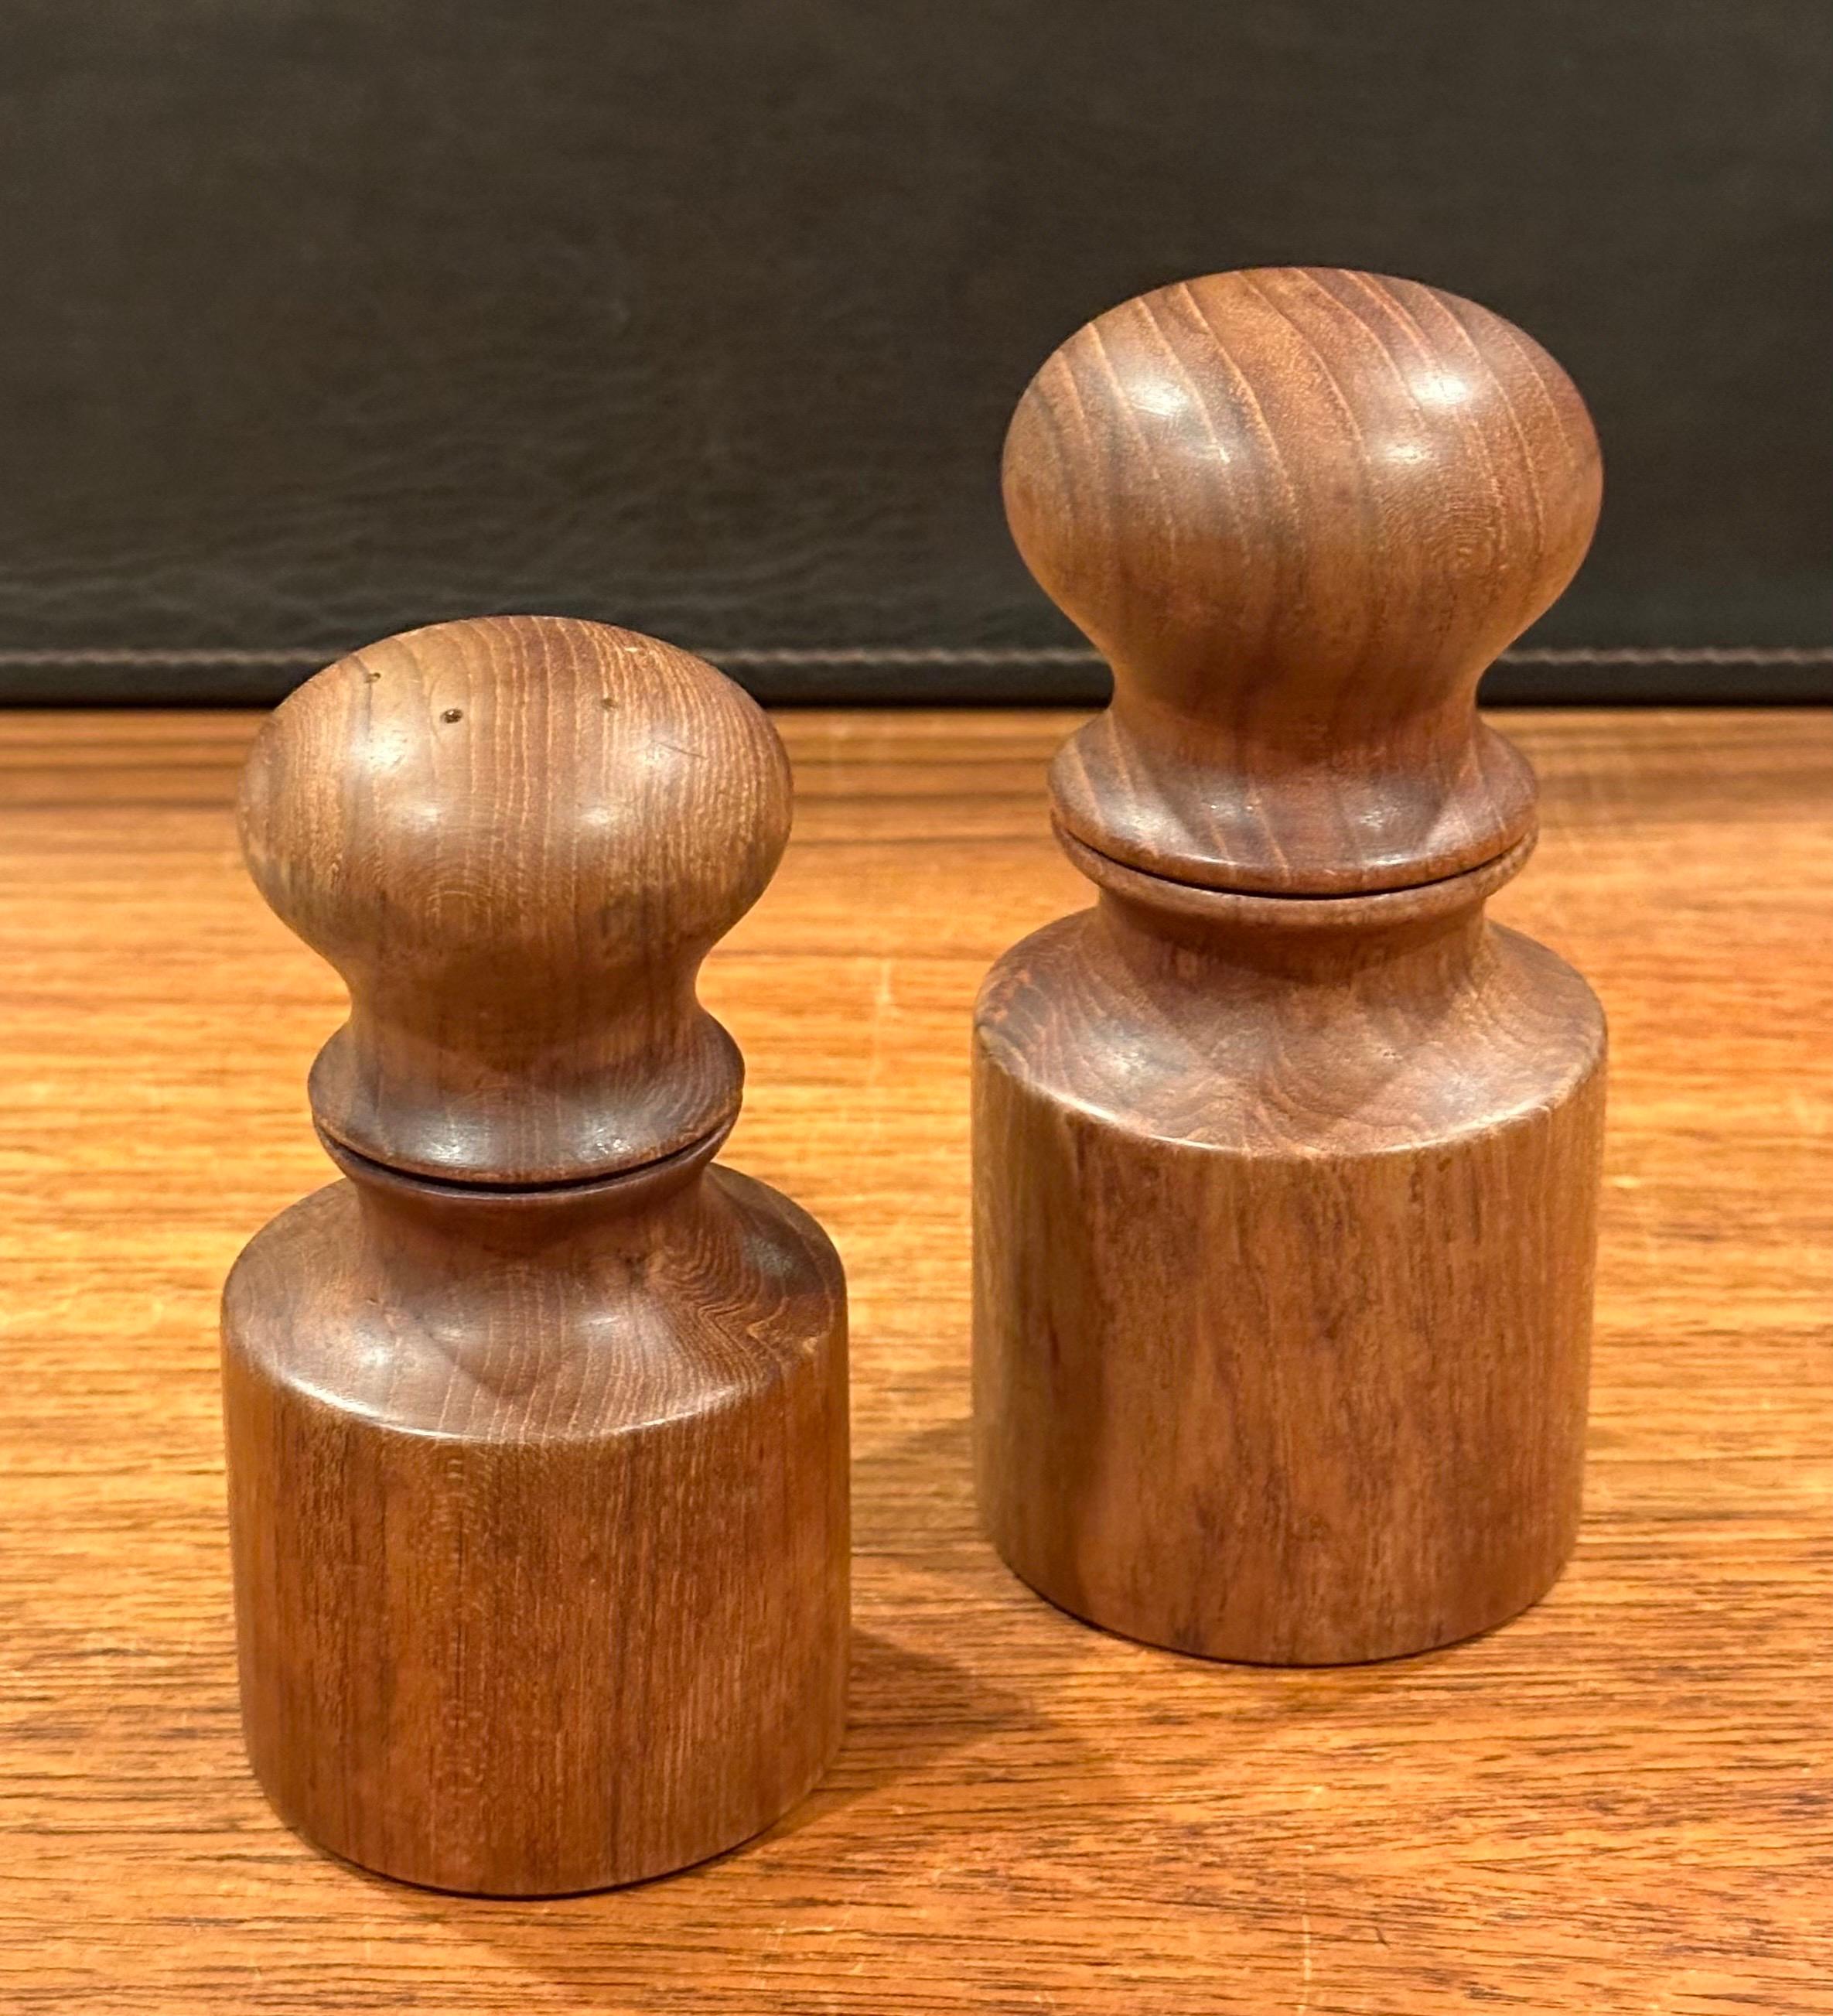 Pair of MCM Teak Salt and Pepper Shakers by Jens Quistgaard for Dansk For Sale 3